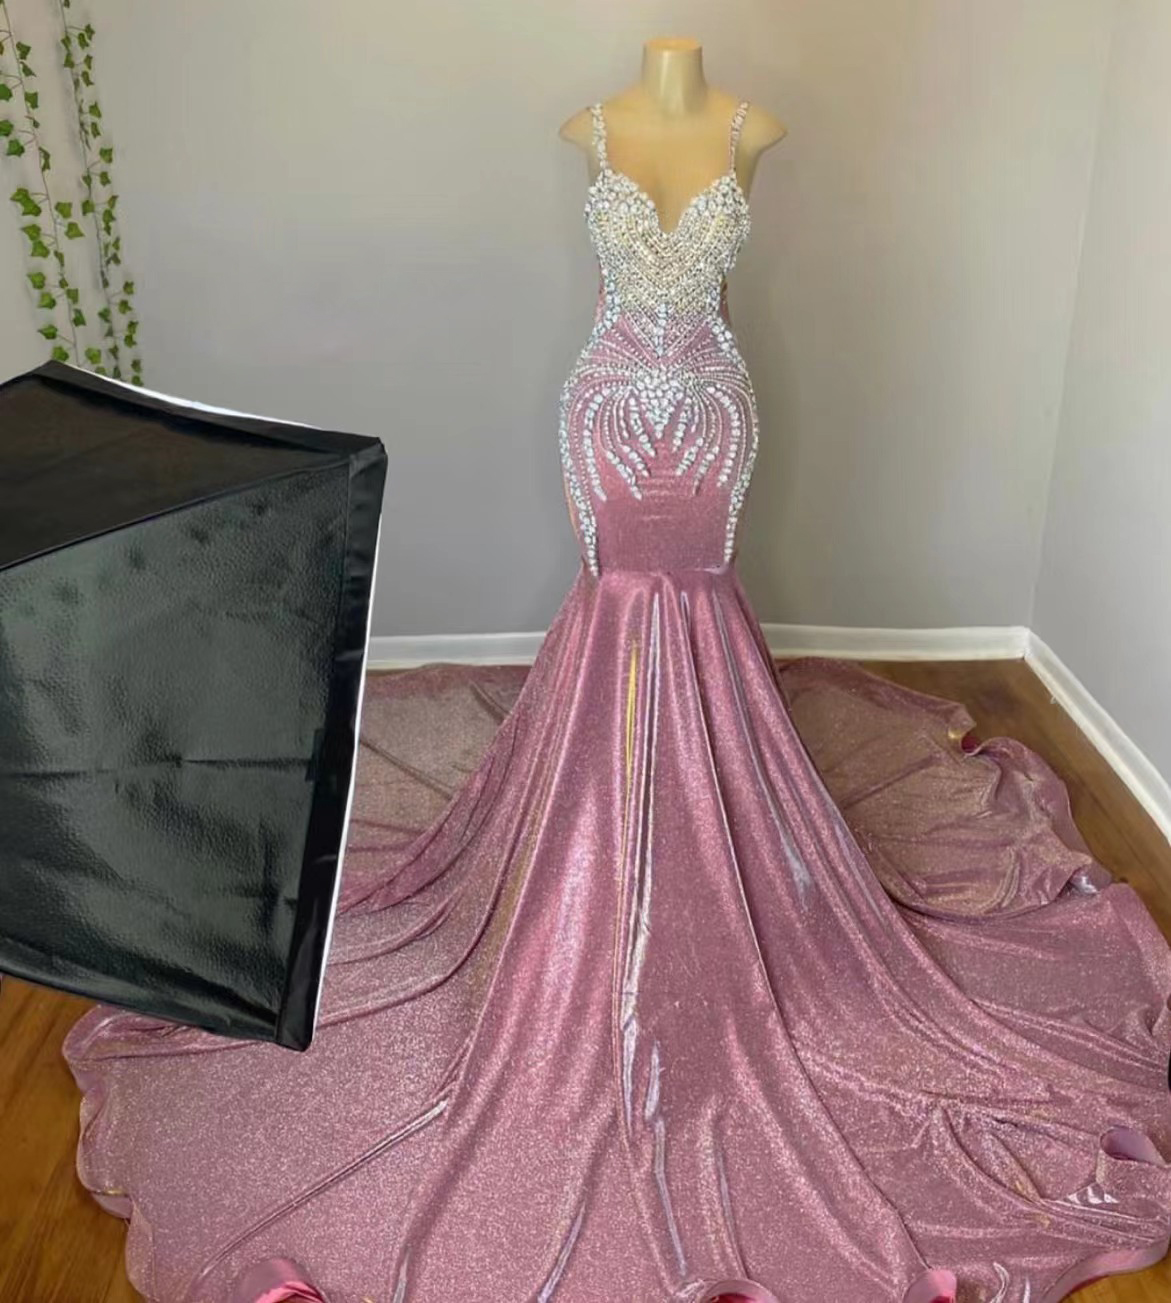 Pink Prom Dresses, Crystals Luxury Prom Dresses, Mermaid Prom Dresses, Rhinestones Diamonds Formal Gown For Women, Robes De Soiree, Evening Gown,